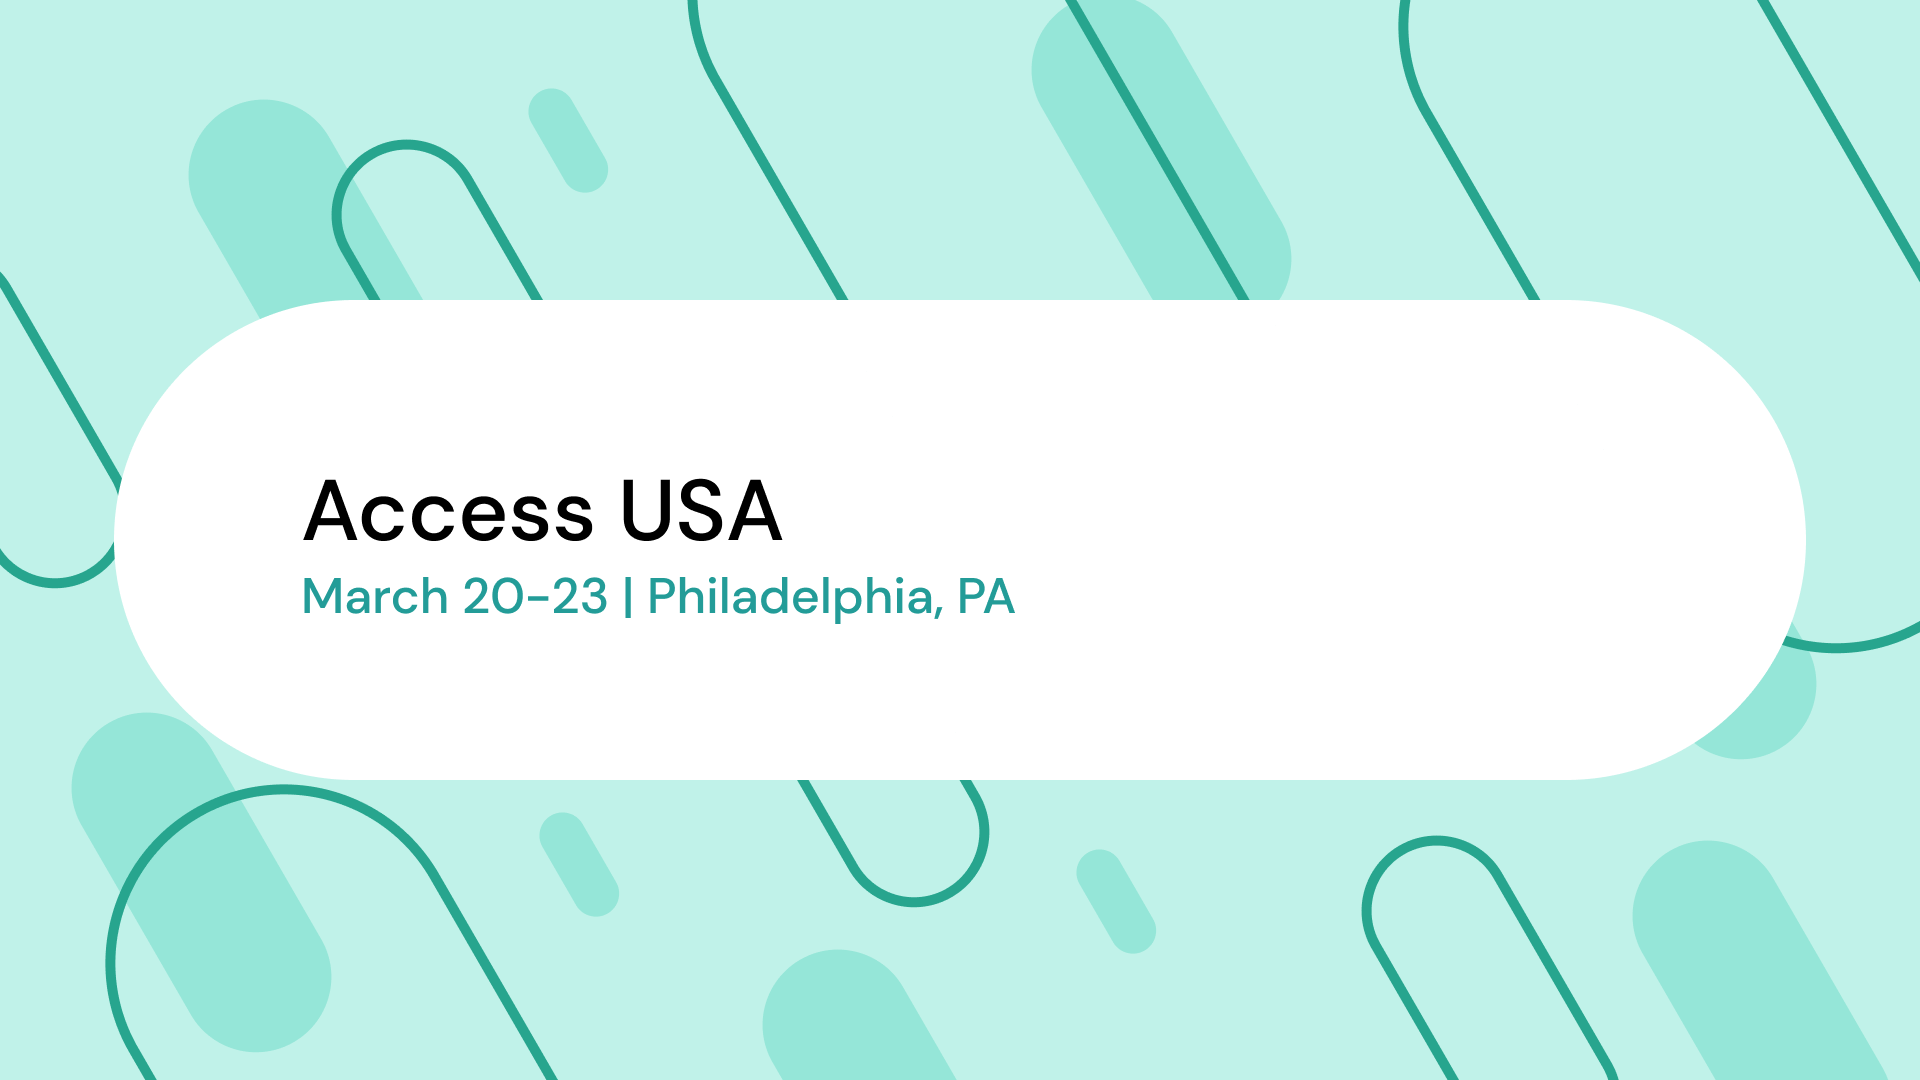 Access USA | Authenticx at Events Landing Page